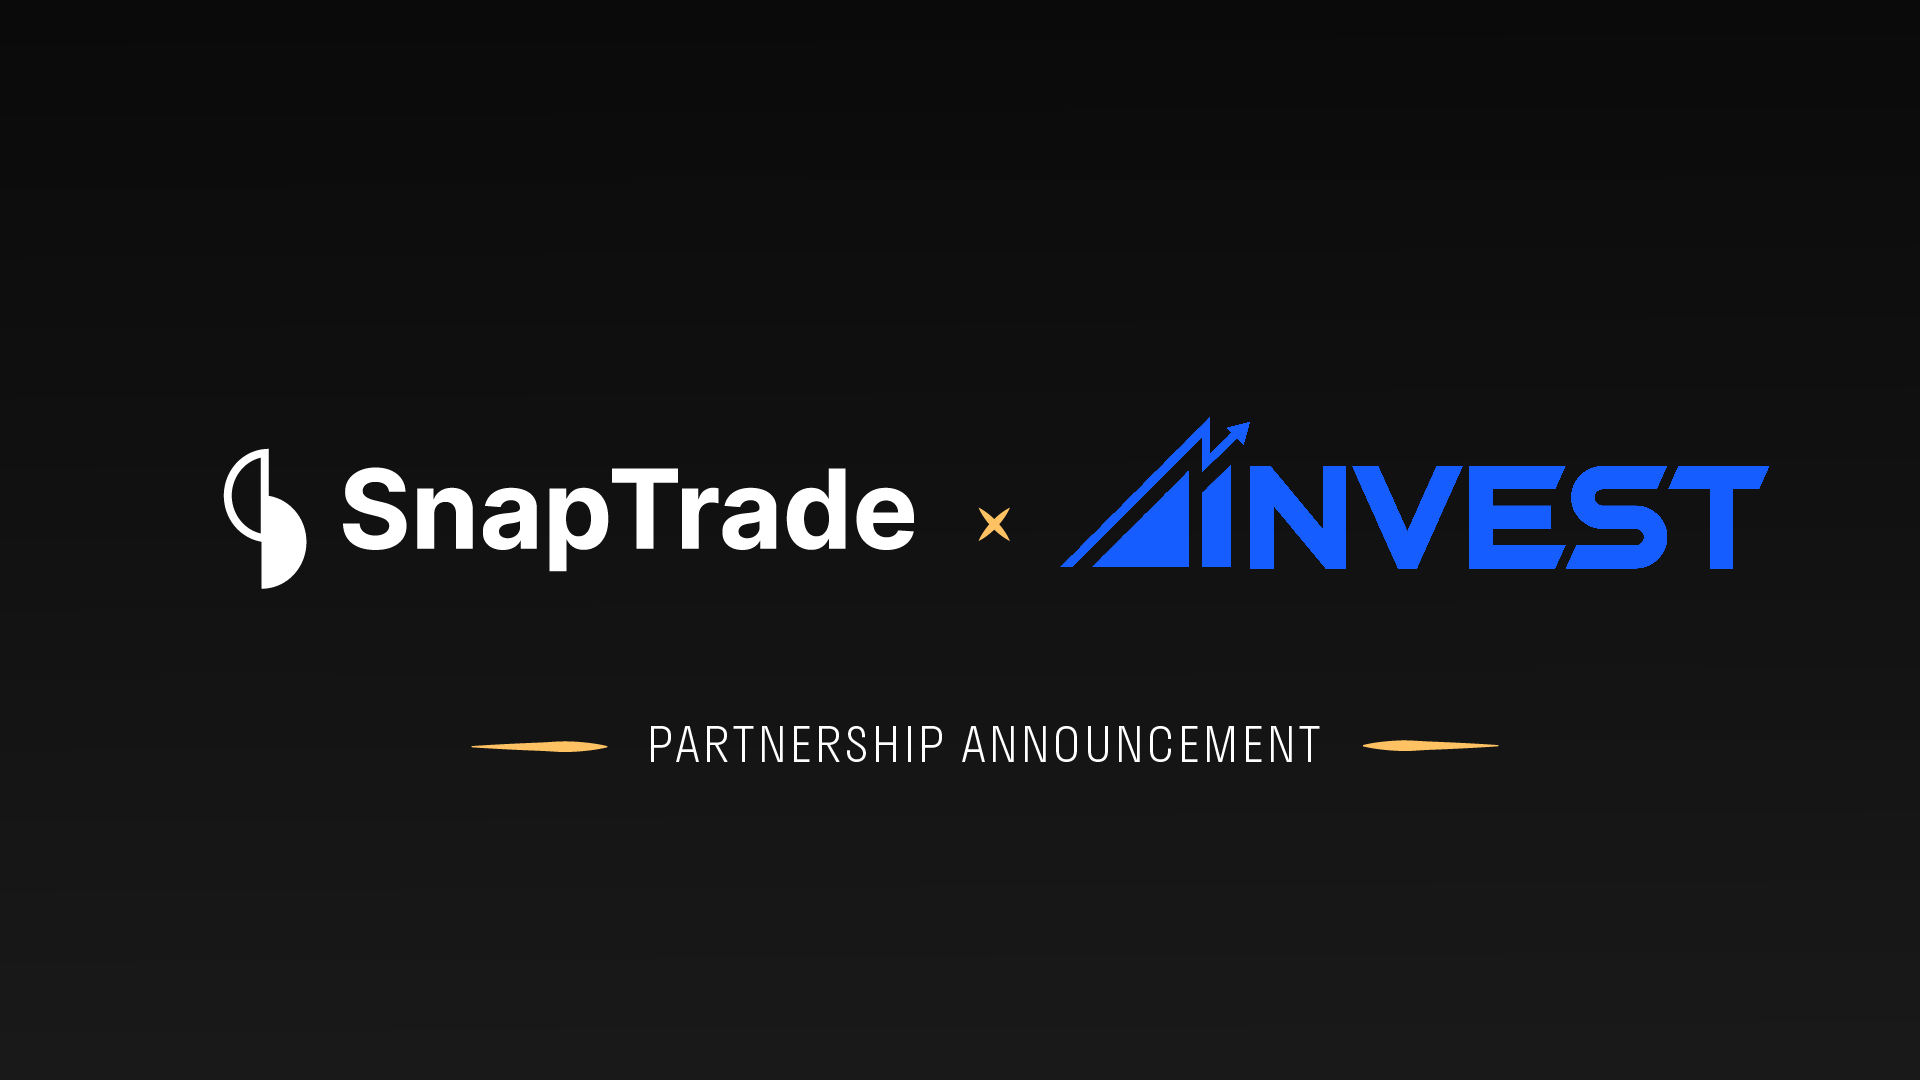 SnapTrade and AInvest announce a partnership